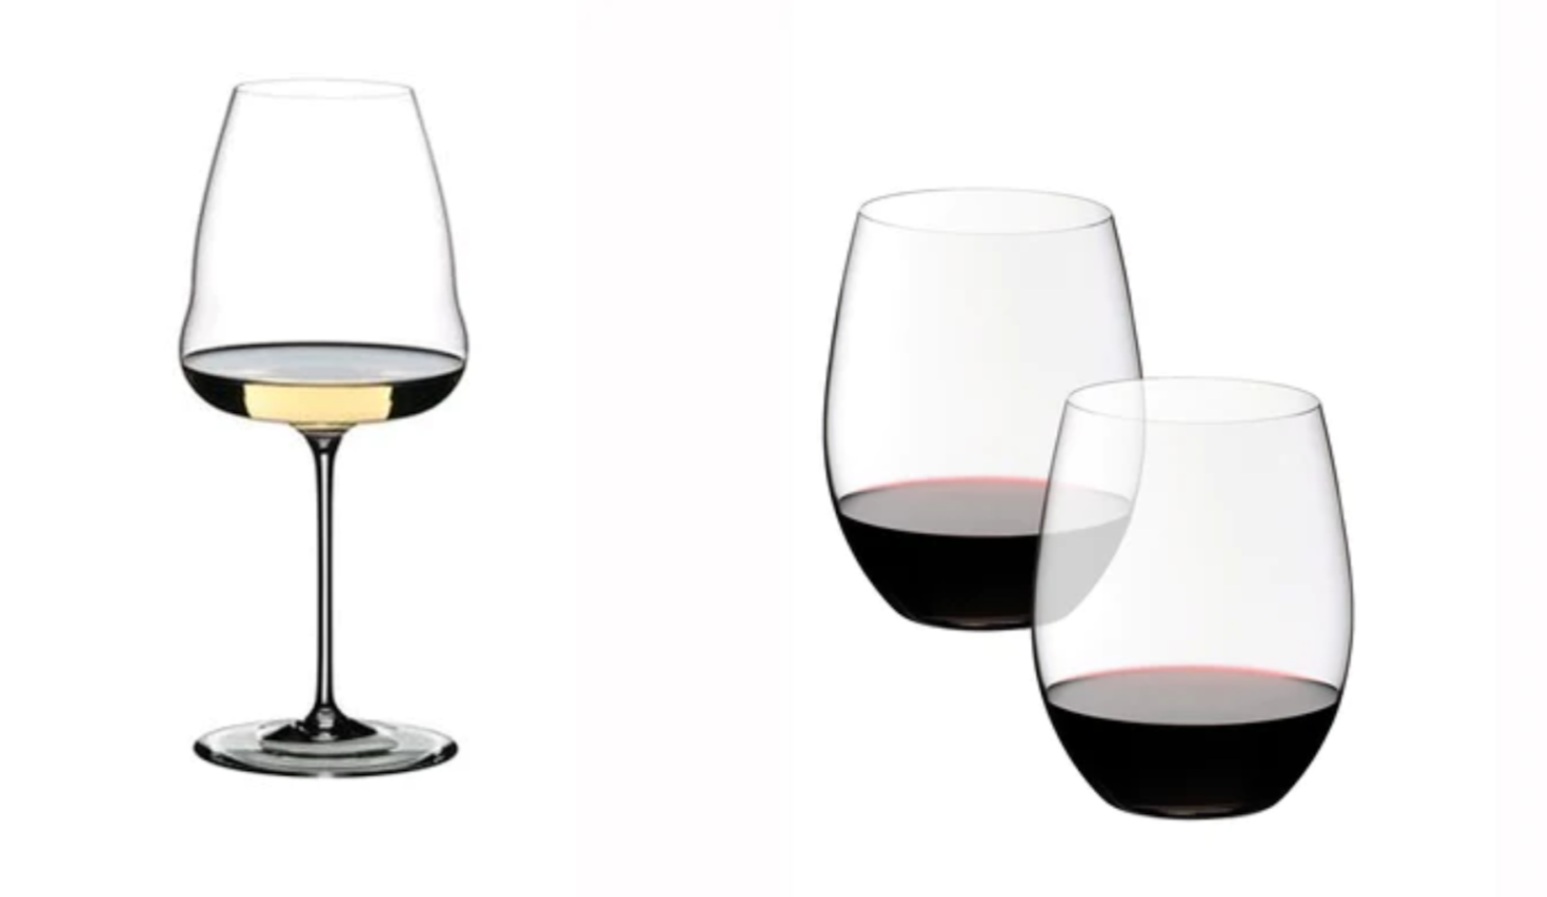 A Riedel Winewing Sauvignon Blanc stemmed glass and Riedel Cabernet/Merlot wine glasses